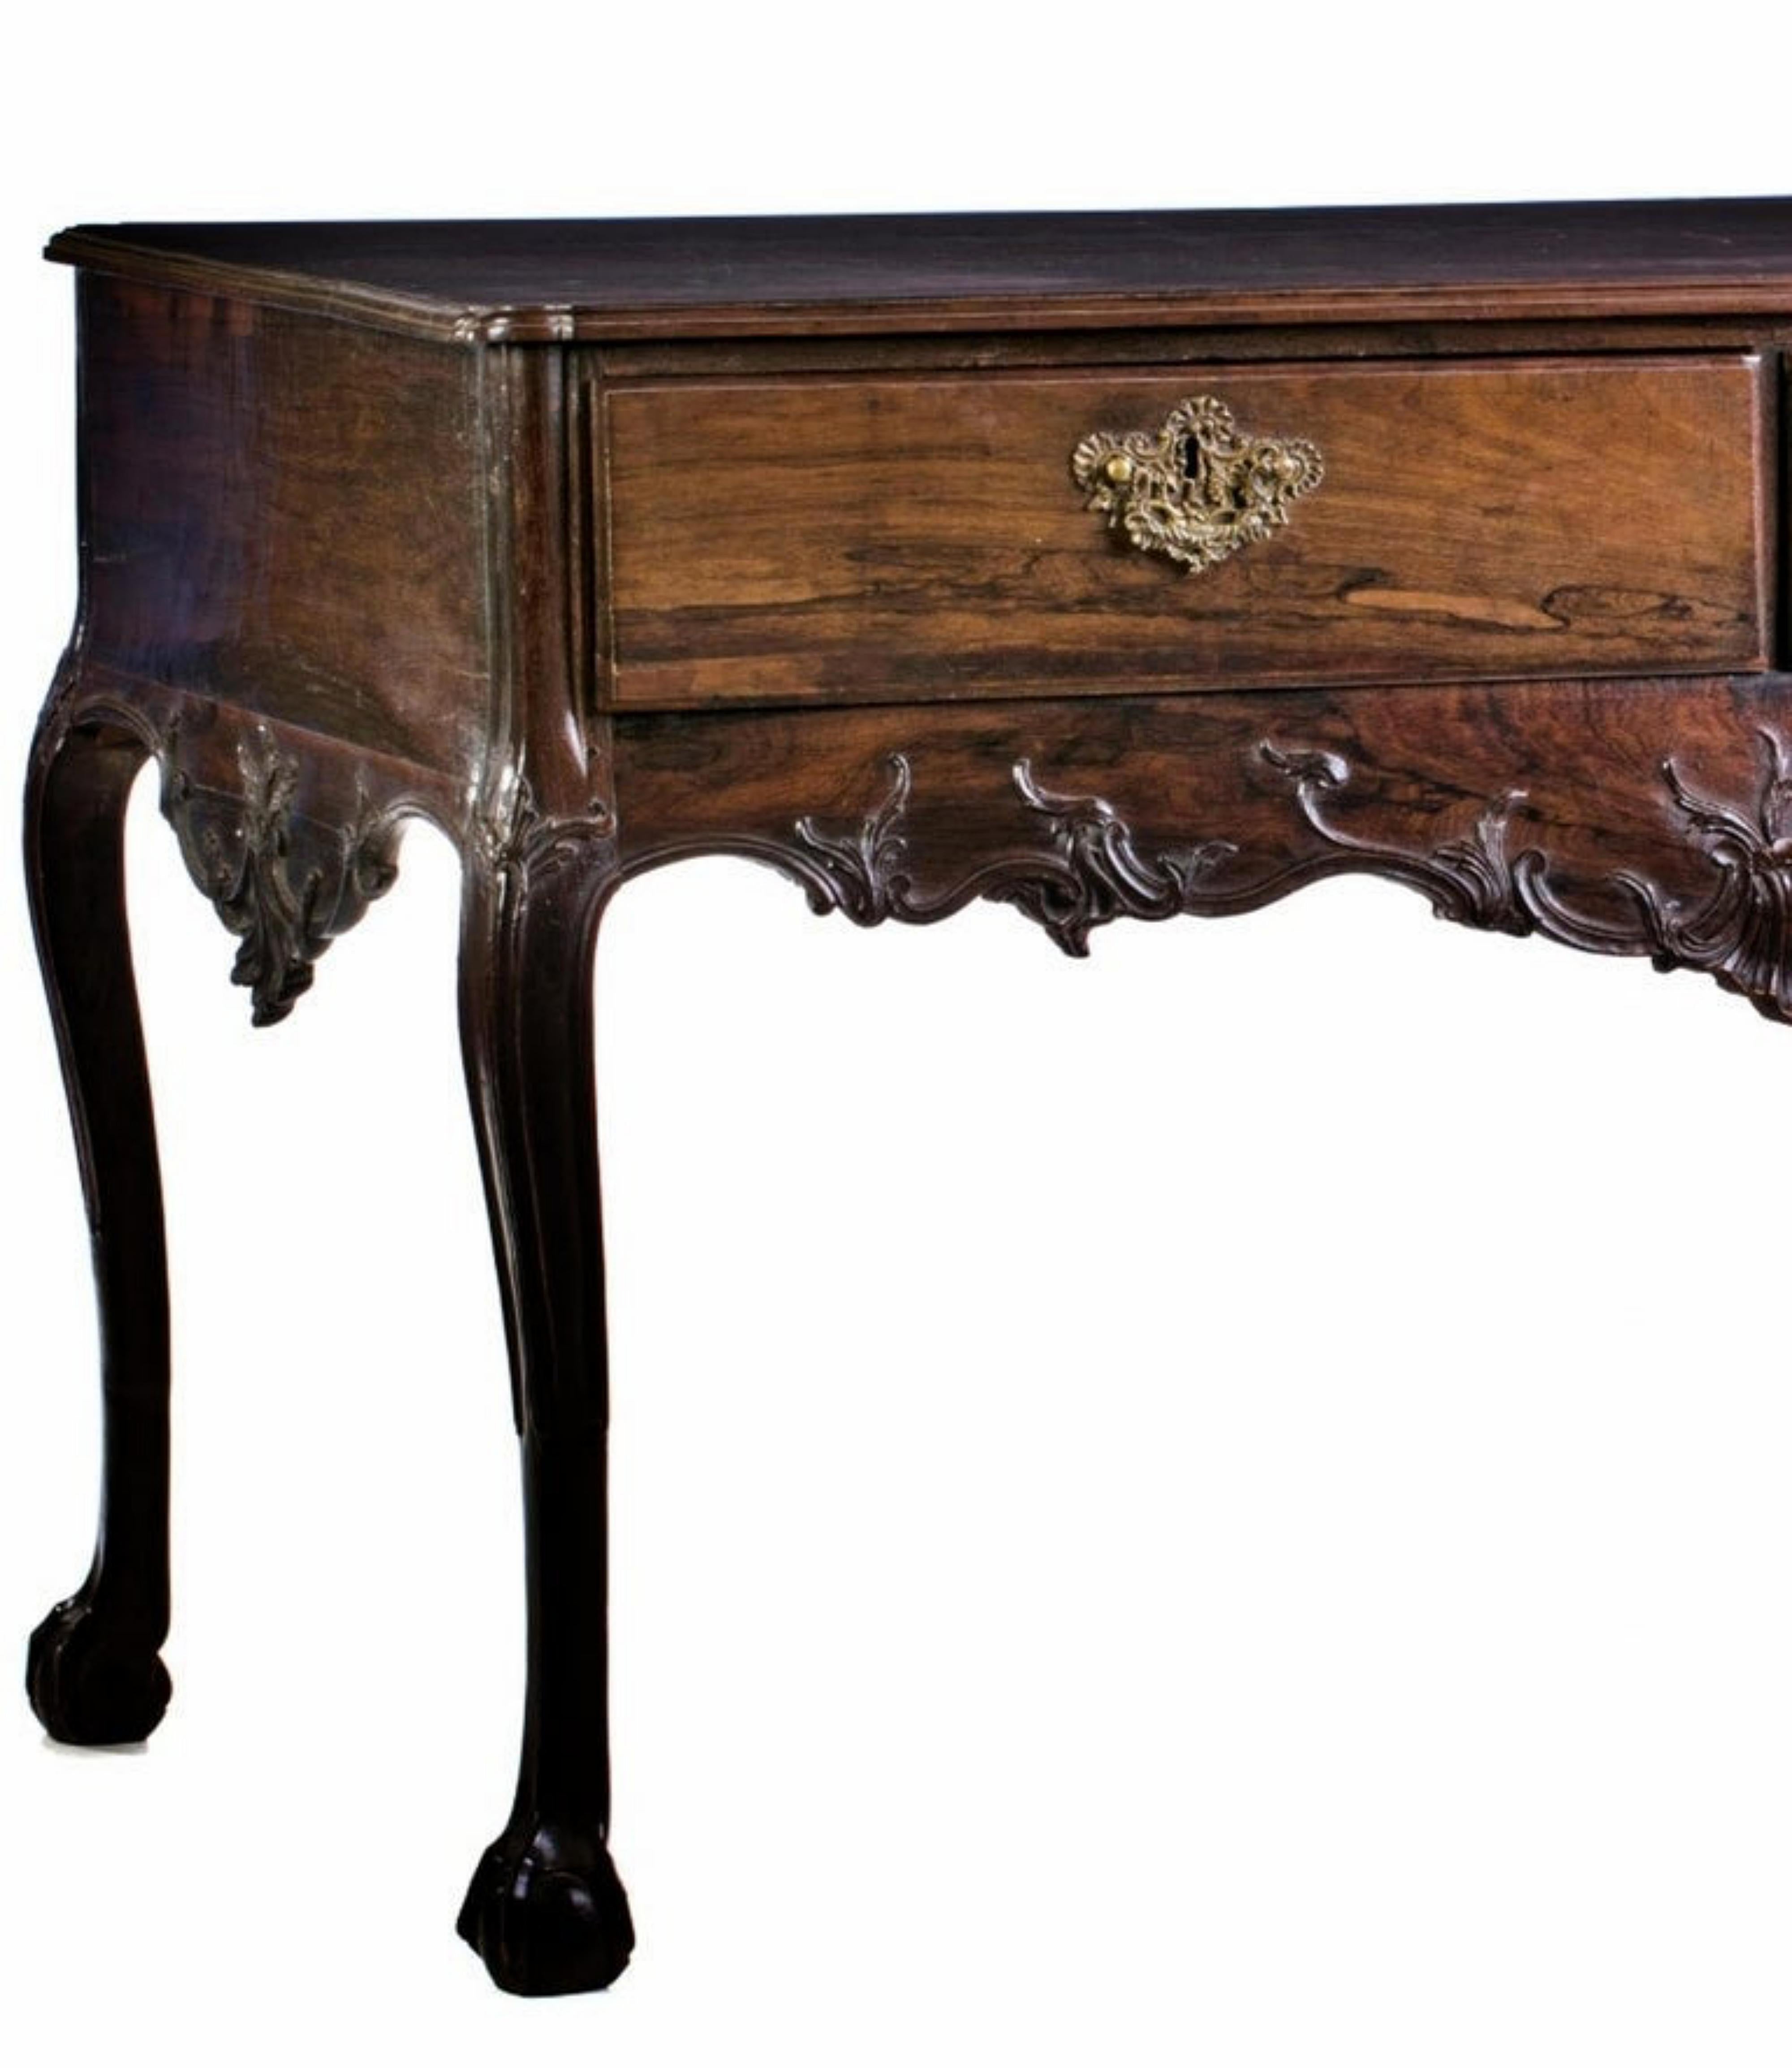 Baroque Rare and Important Portuguese Center Table, 18th Century For Sale